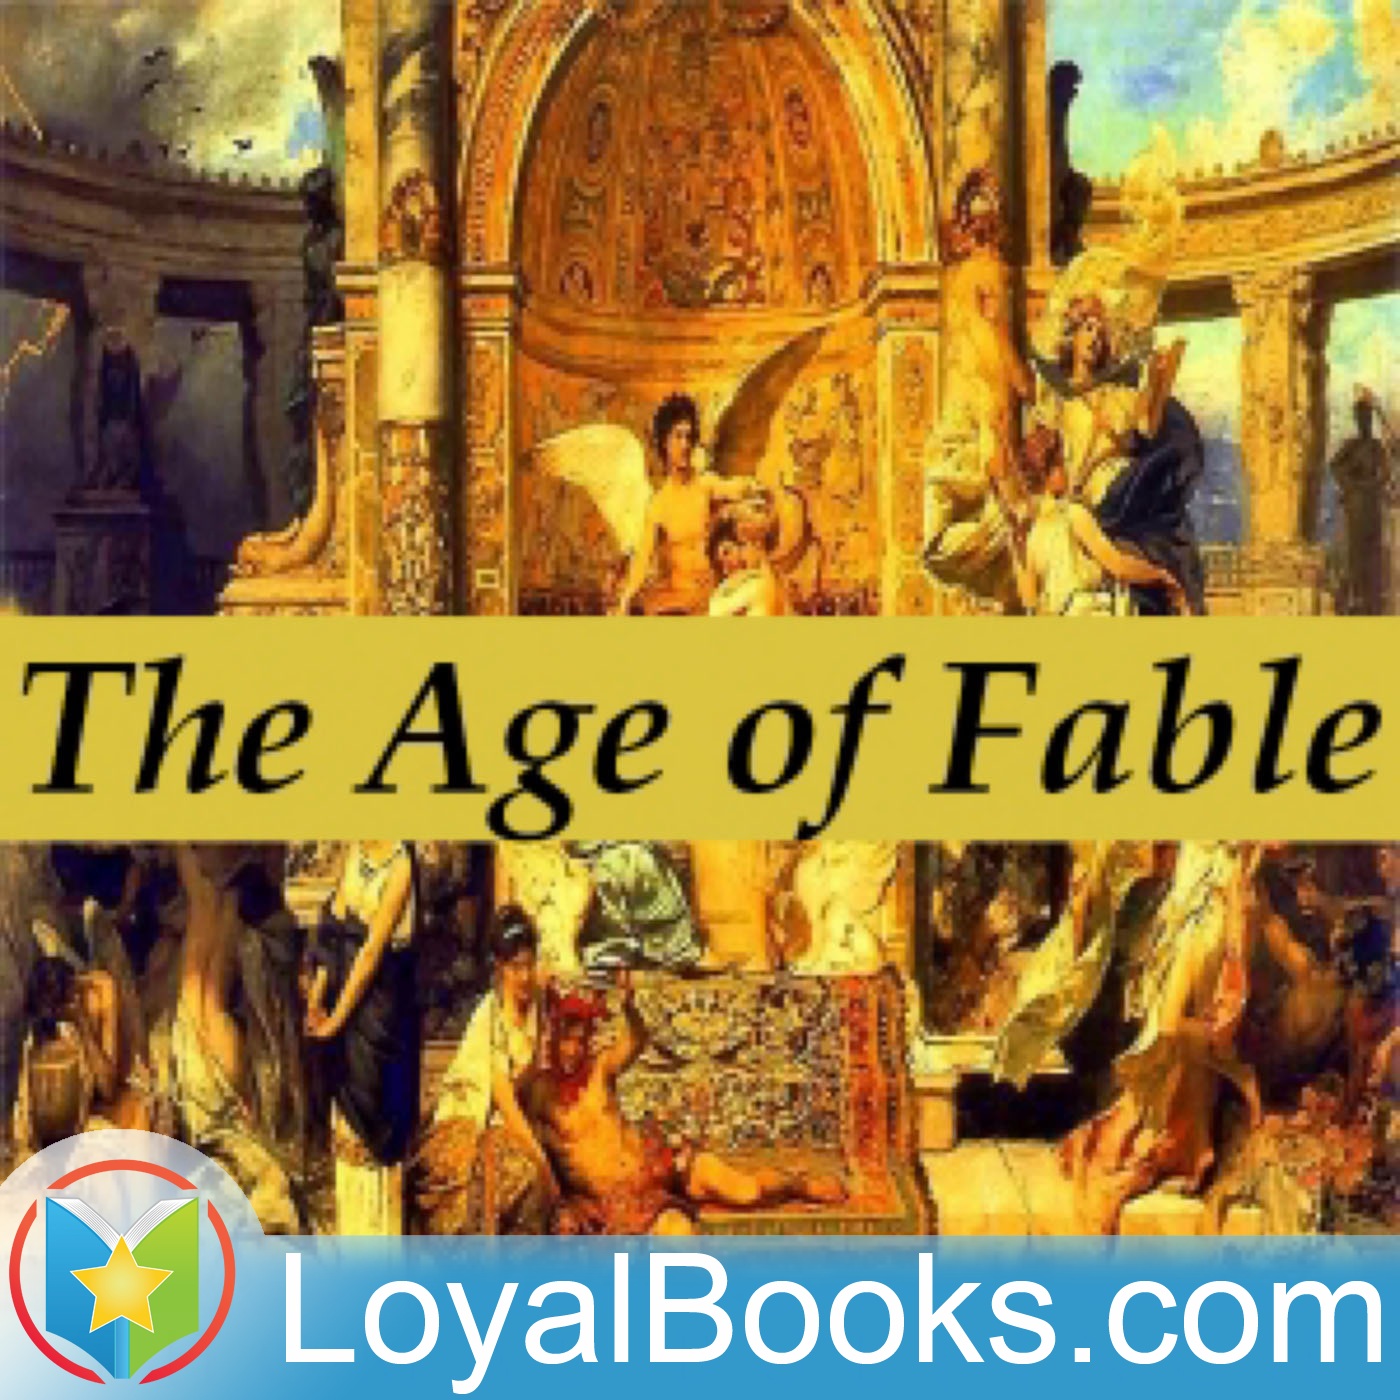 The Age of Fable: Chapter 16